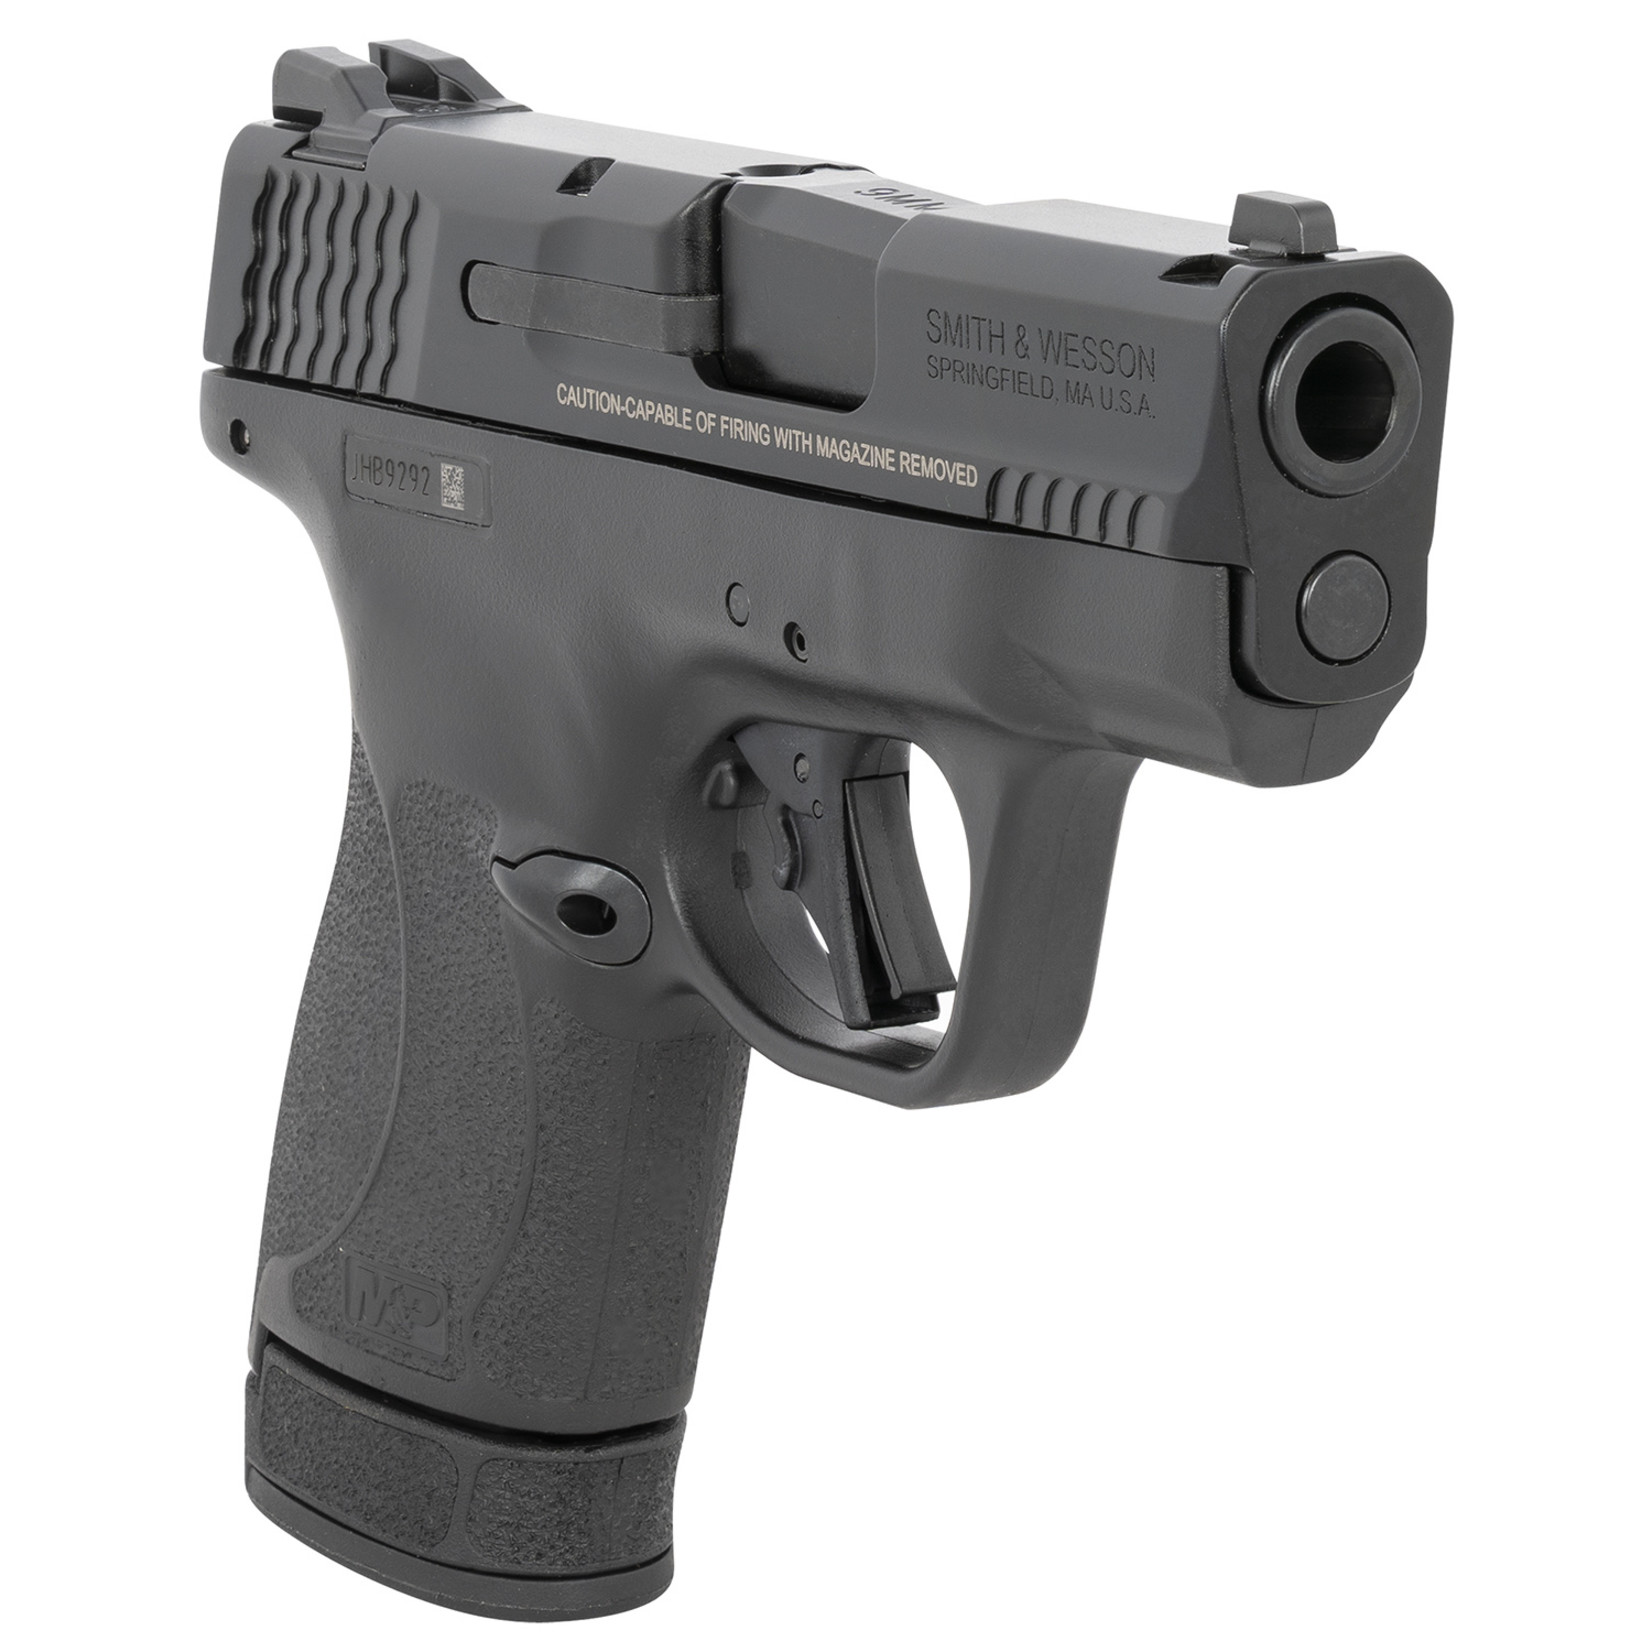 Smith & Wesson Smith & Wesson  M&P Shield 9mm SKU13248